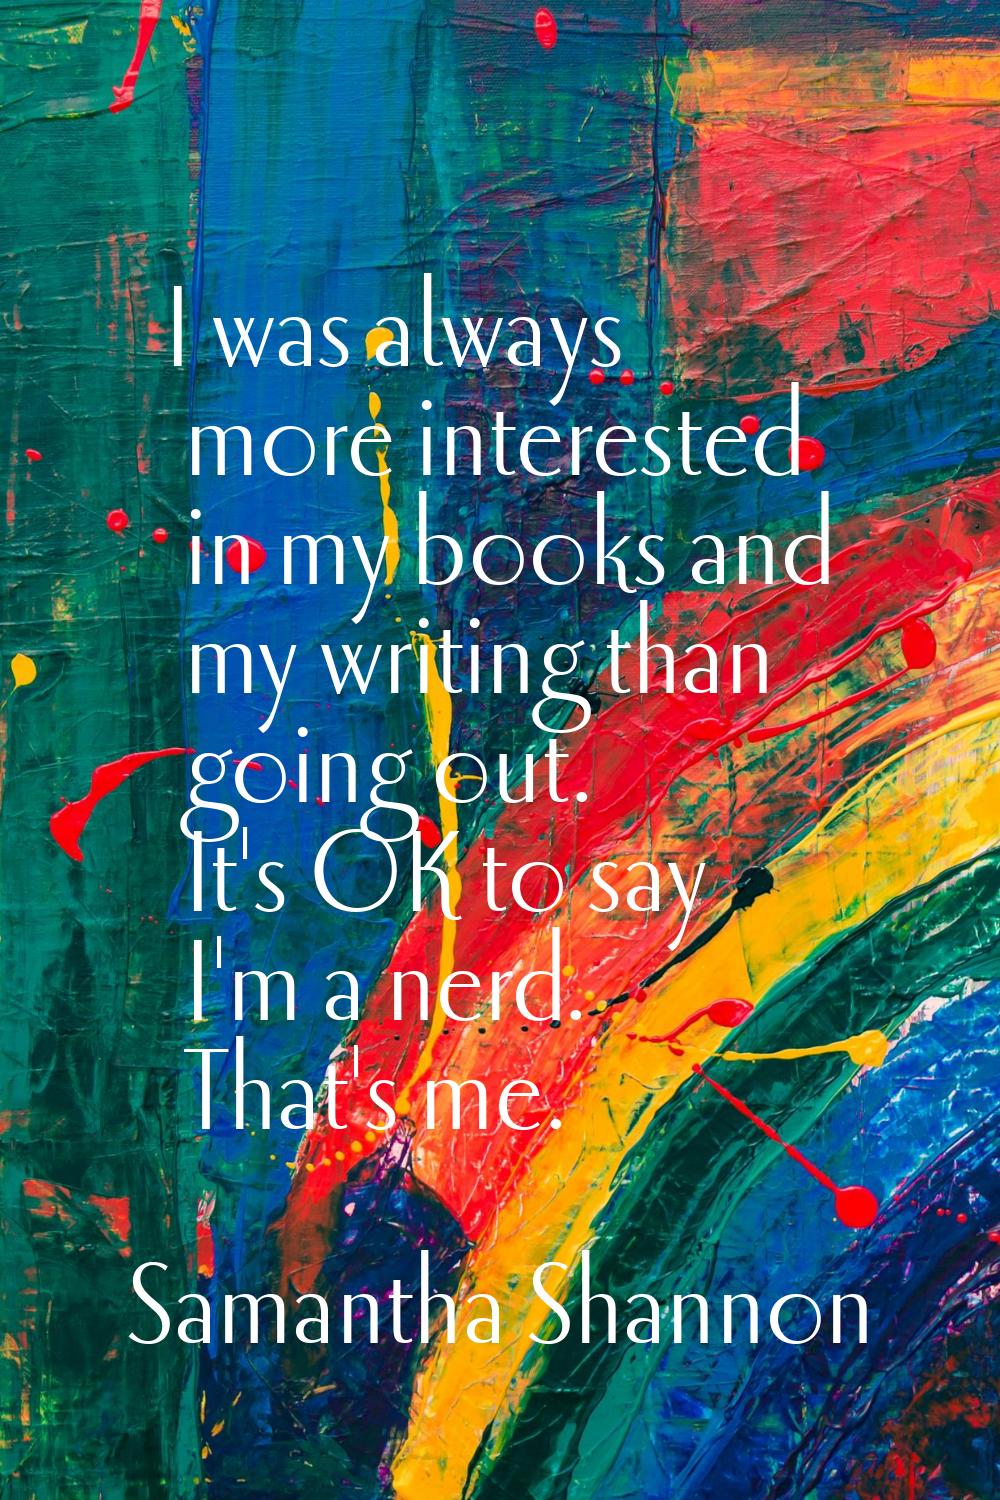 I was always more interested in my books and my writing than going out. It's OK to say I'm a nerd. 